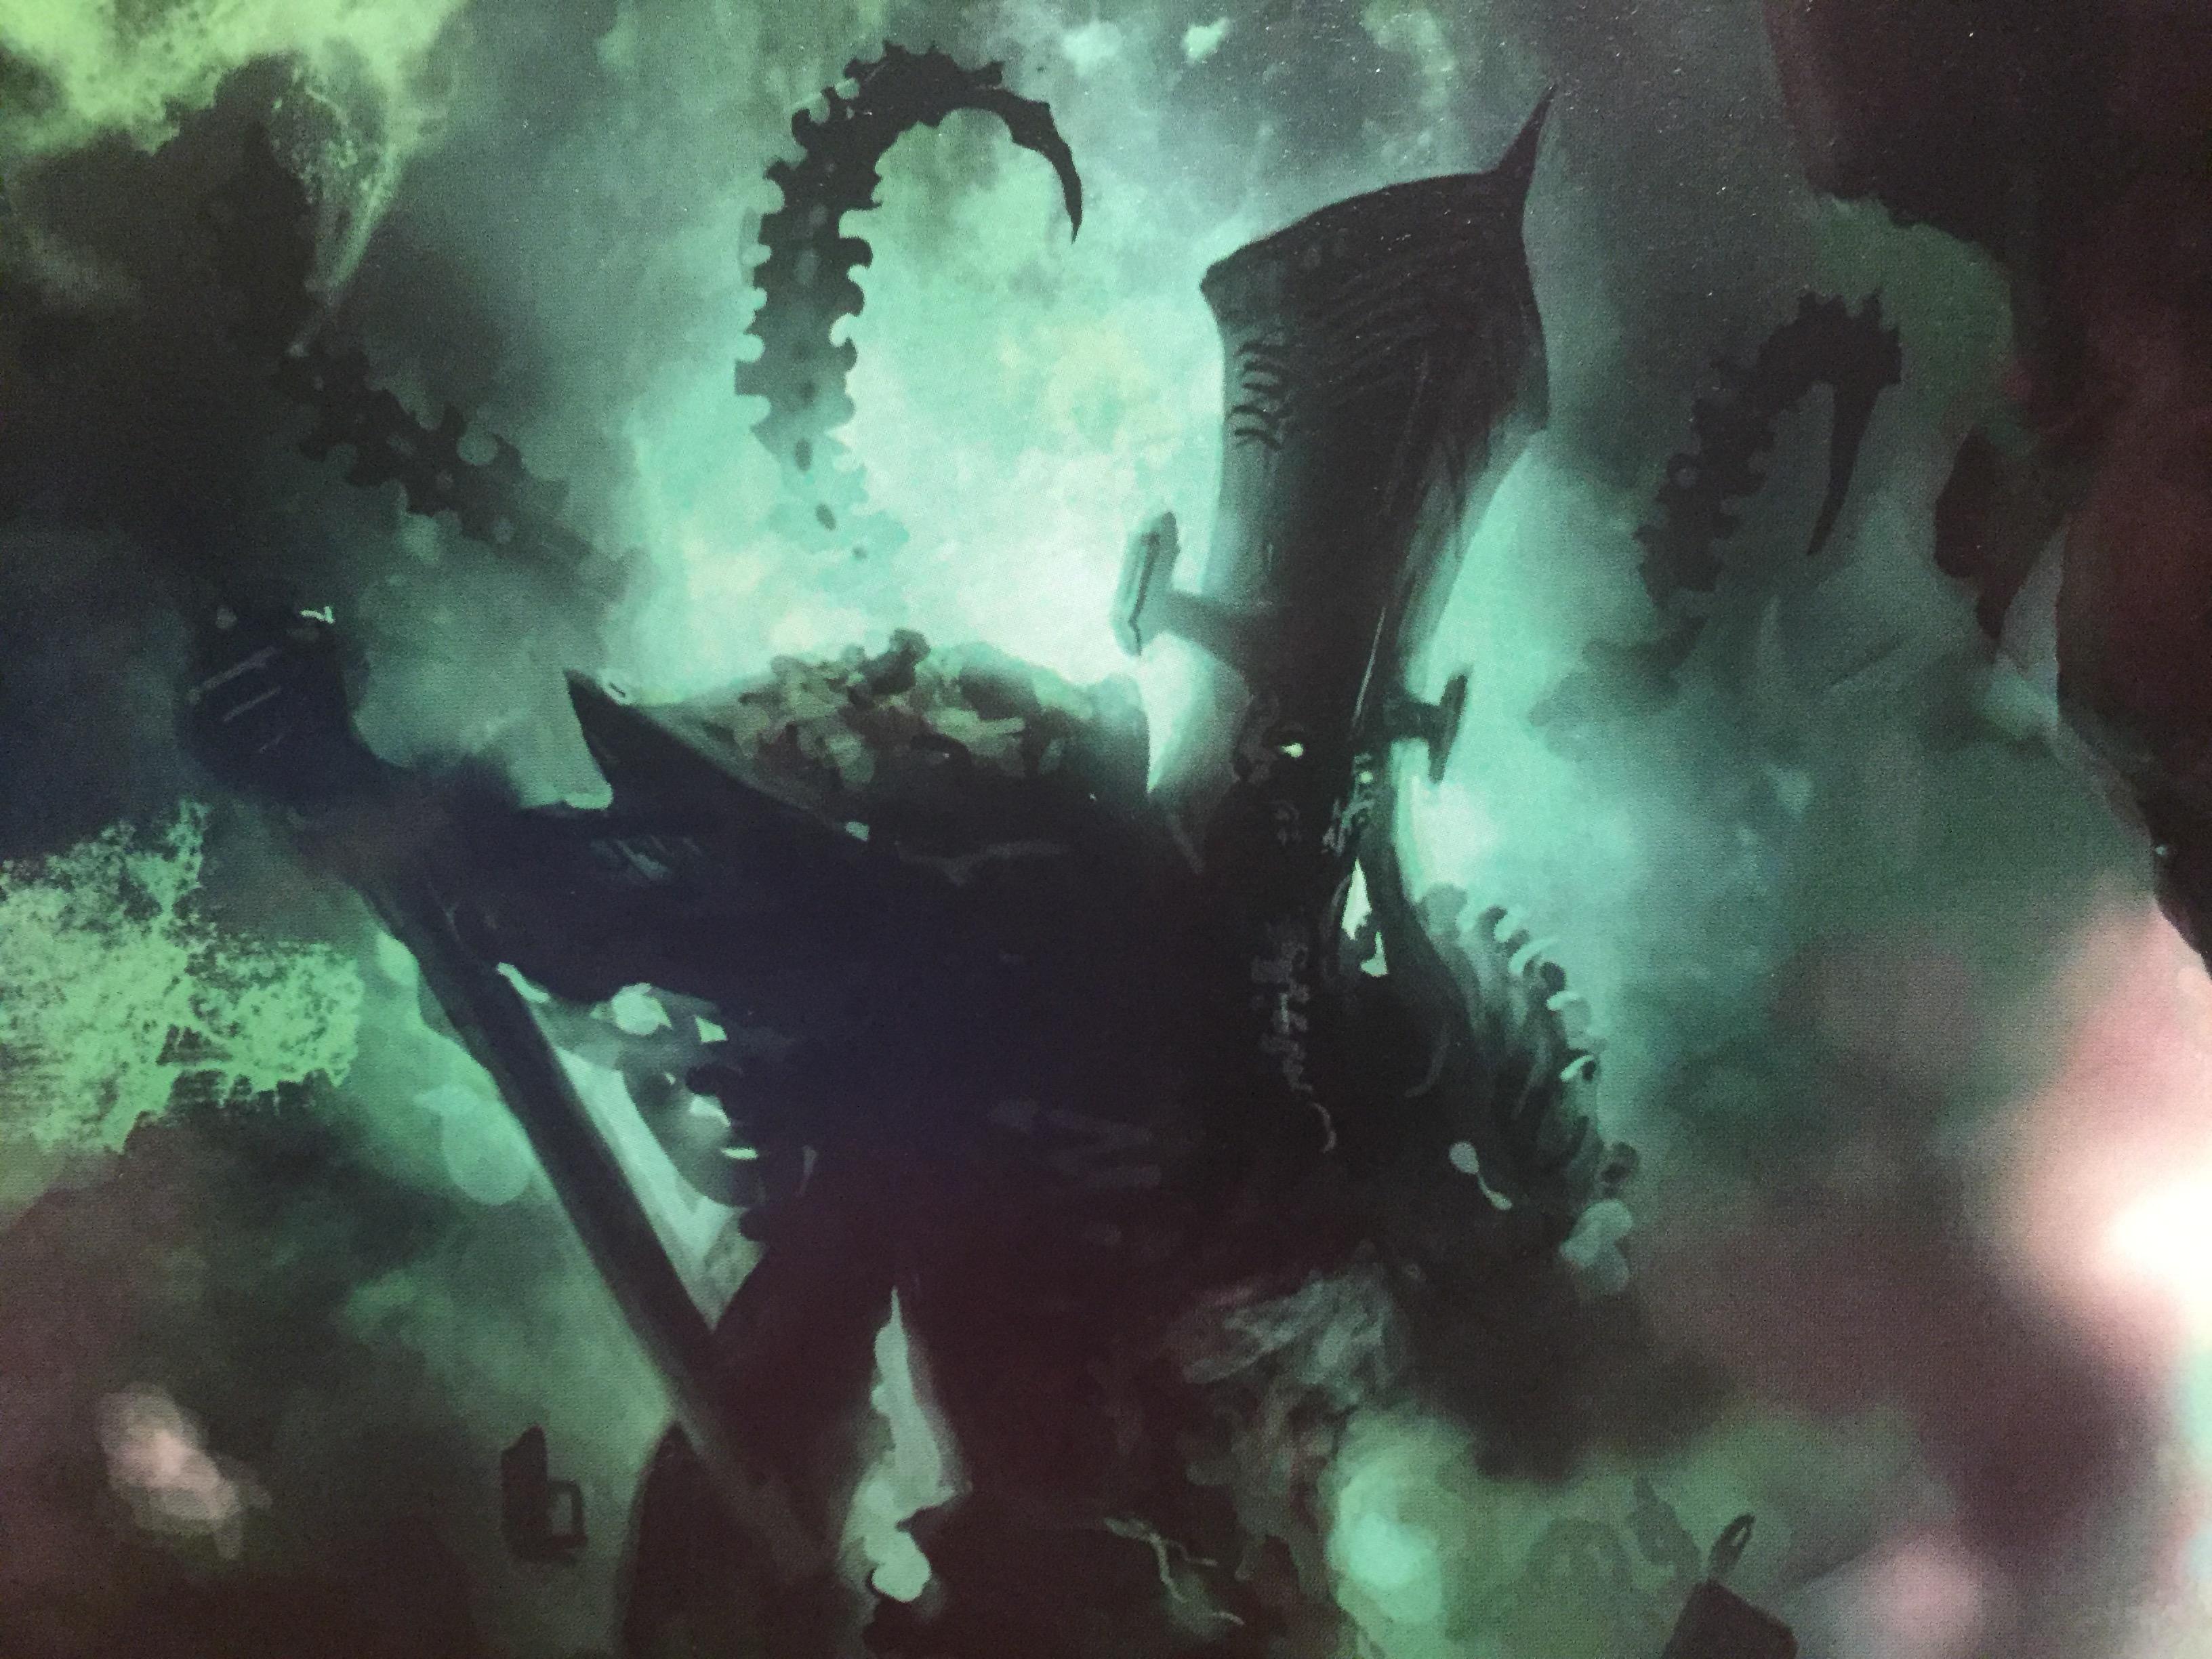 Nagash - his lore & background from the Old World to the Mortal Realms!